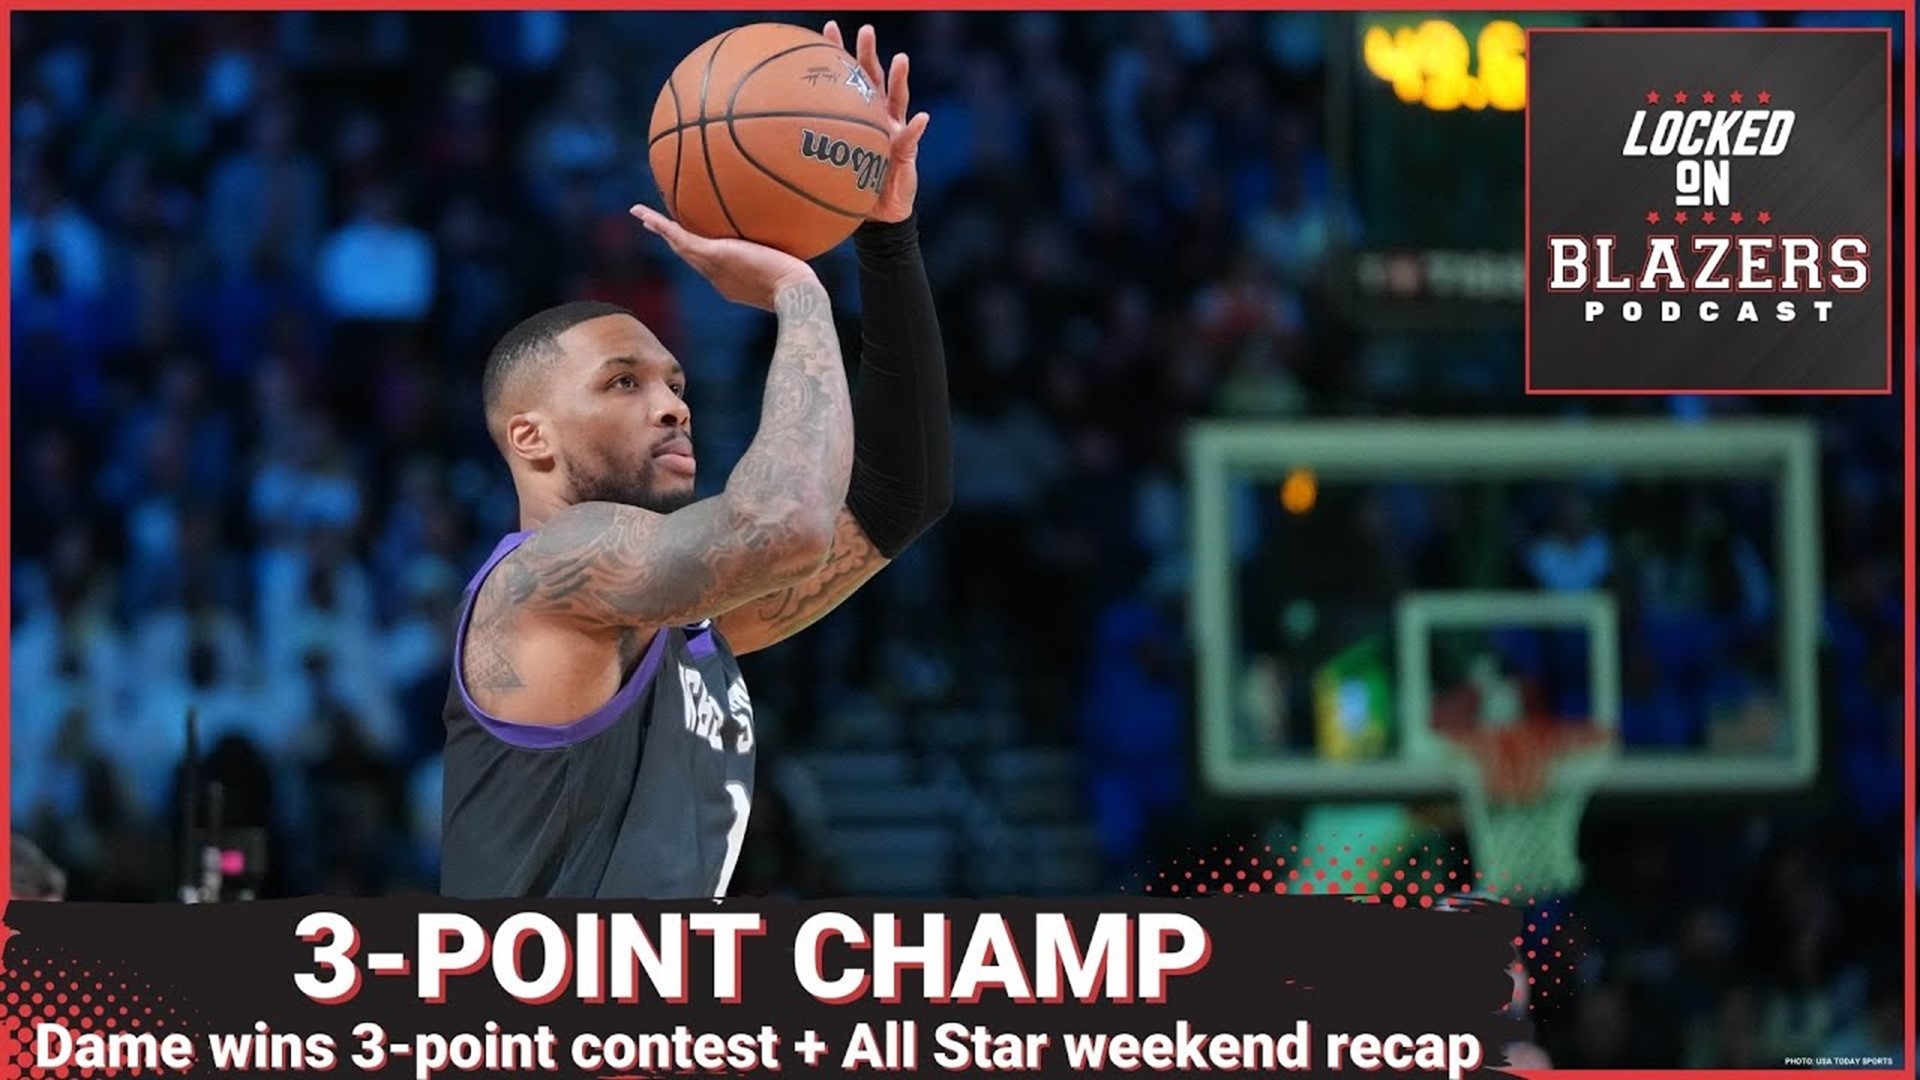 Damian Lillard won the NBA 3-point contest at NBA All-Star Weekend. There was also an All-Star Game. There was plenty of joy to find at All-Star Weekend.